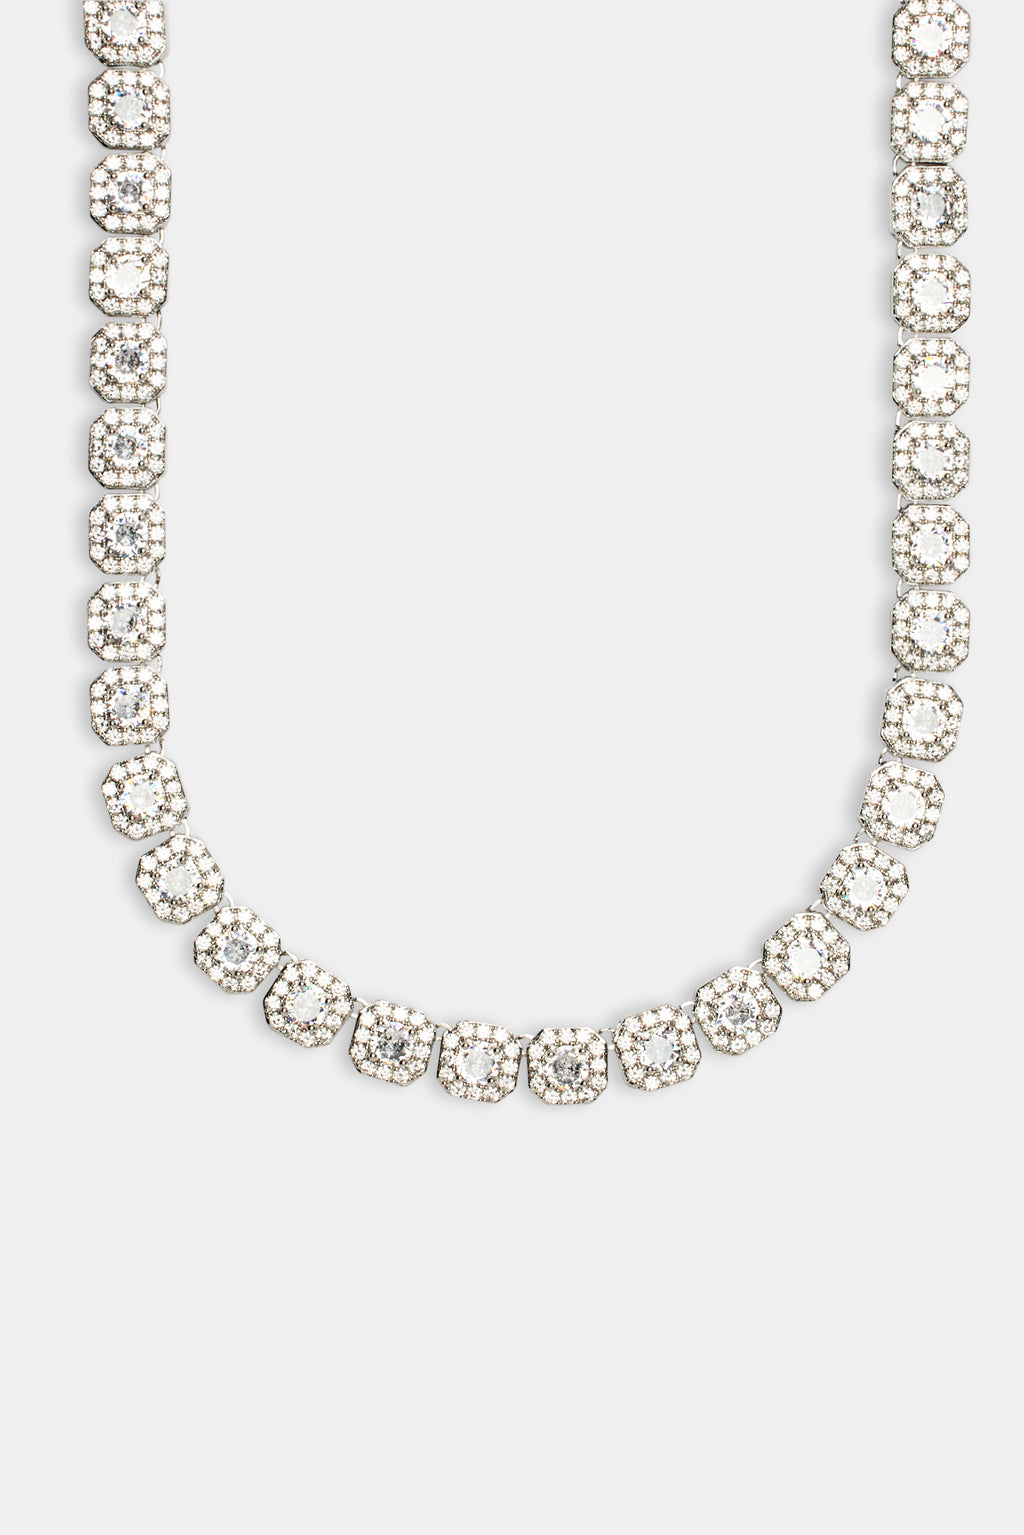 GLD Clustered Tennis Necklace in White Gold | eBay